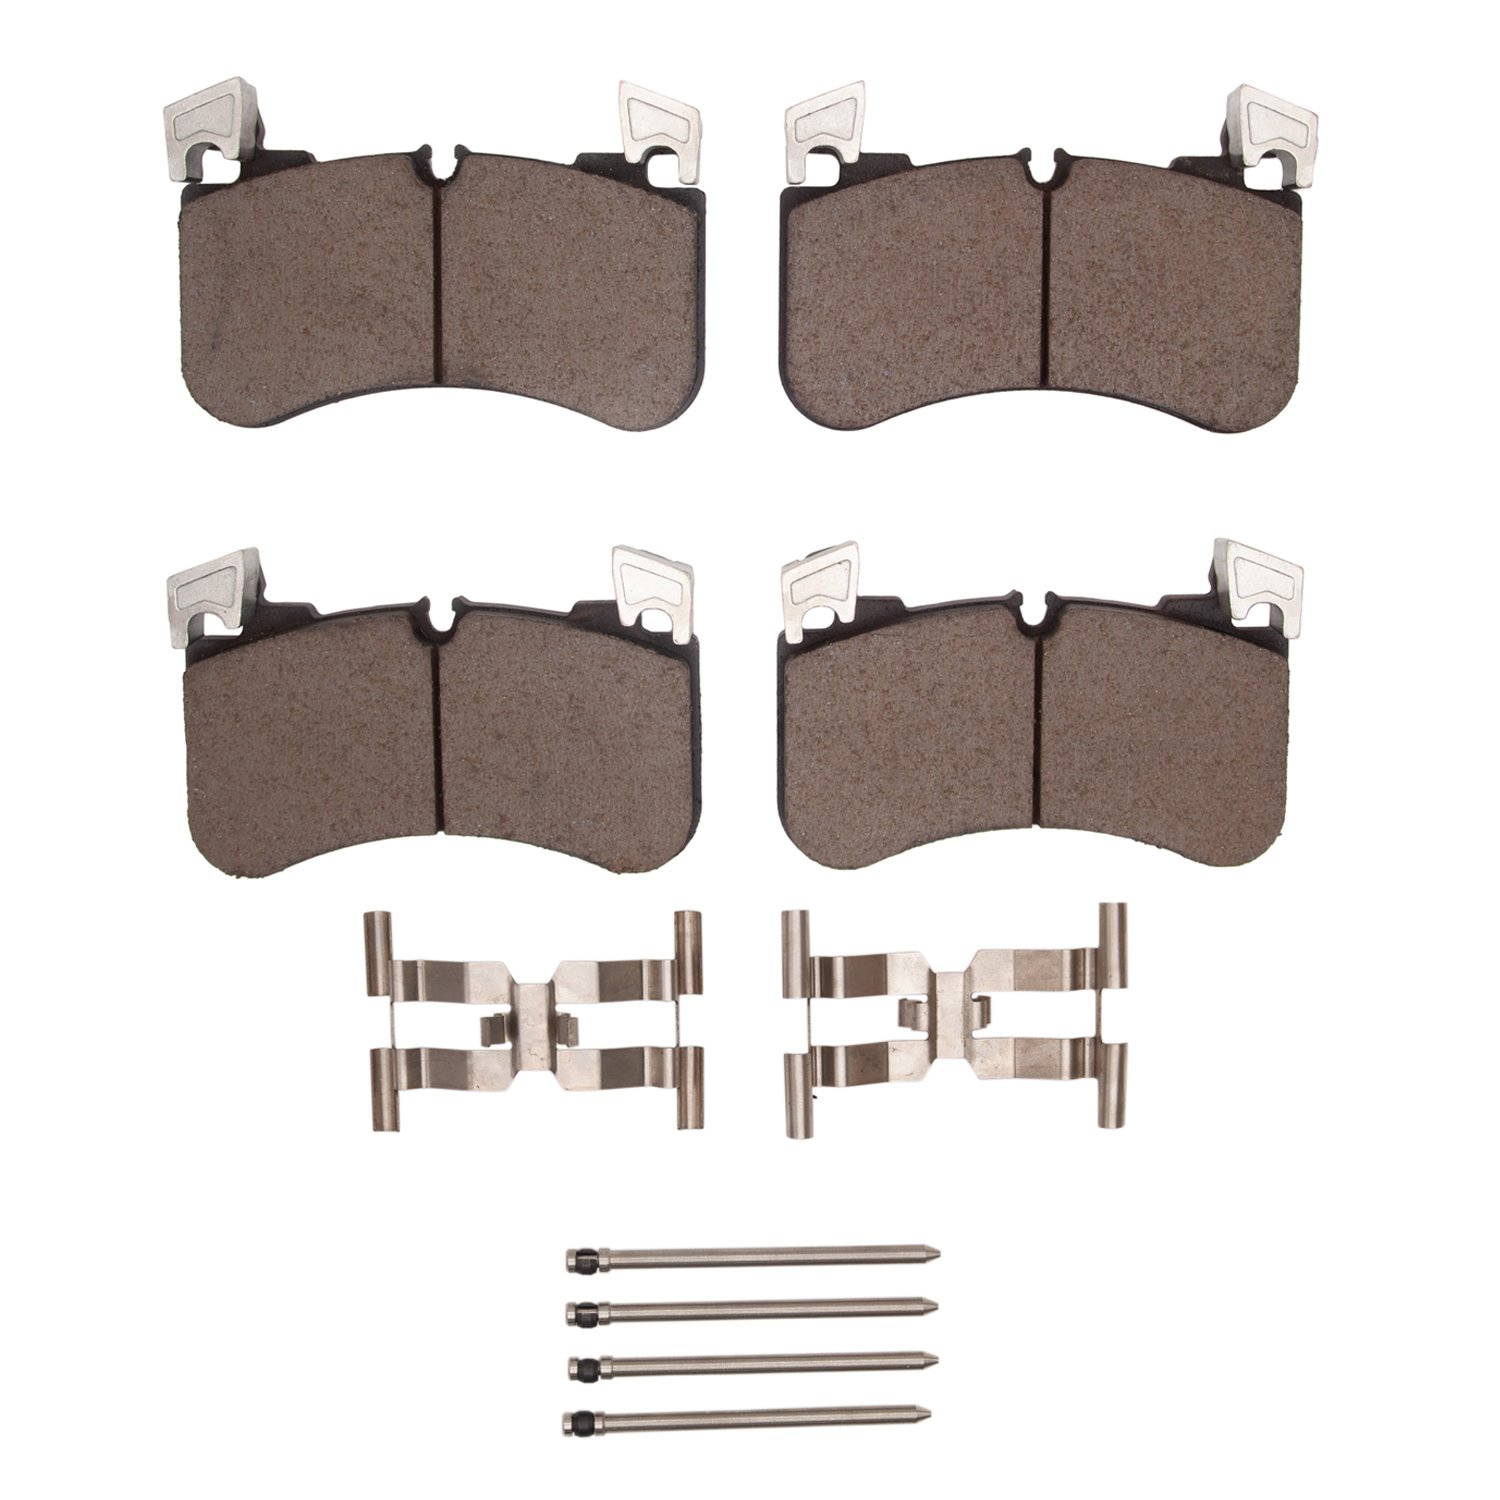 1551-2184-01 5000 Advanced Ceramic Brake Pads & Hardware Kit, Fits Select Land Rover, Position: Front